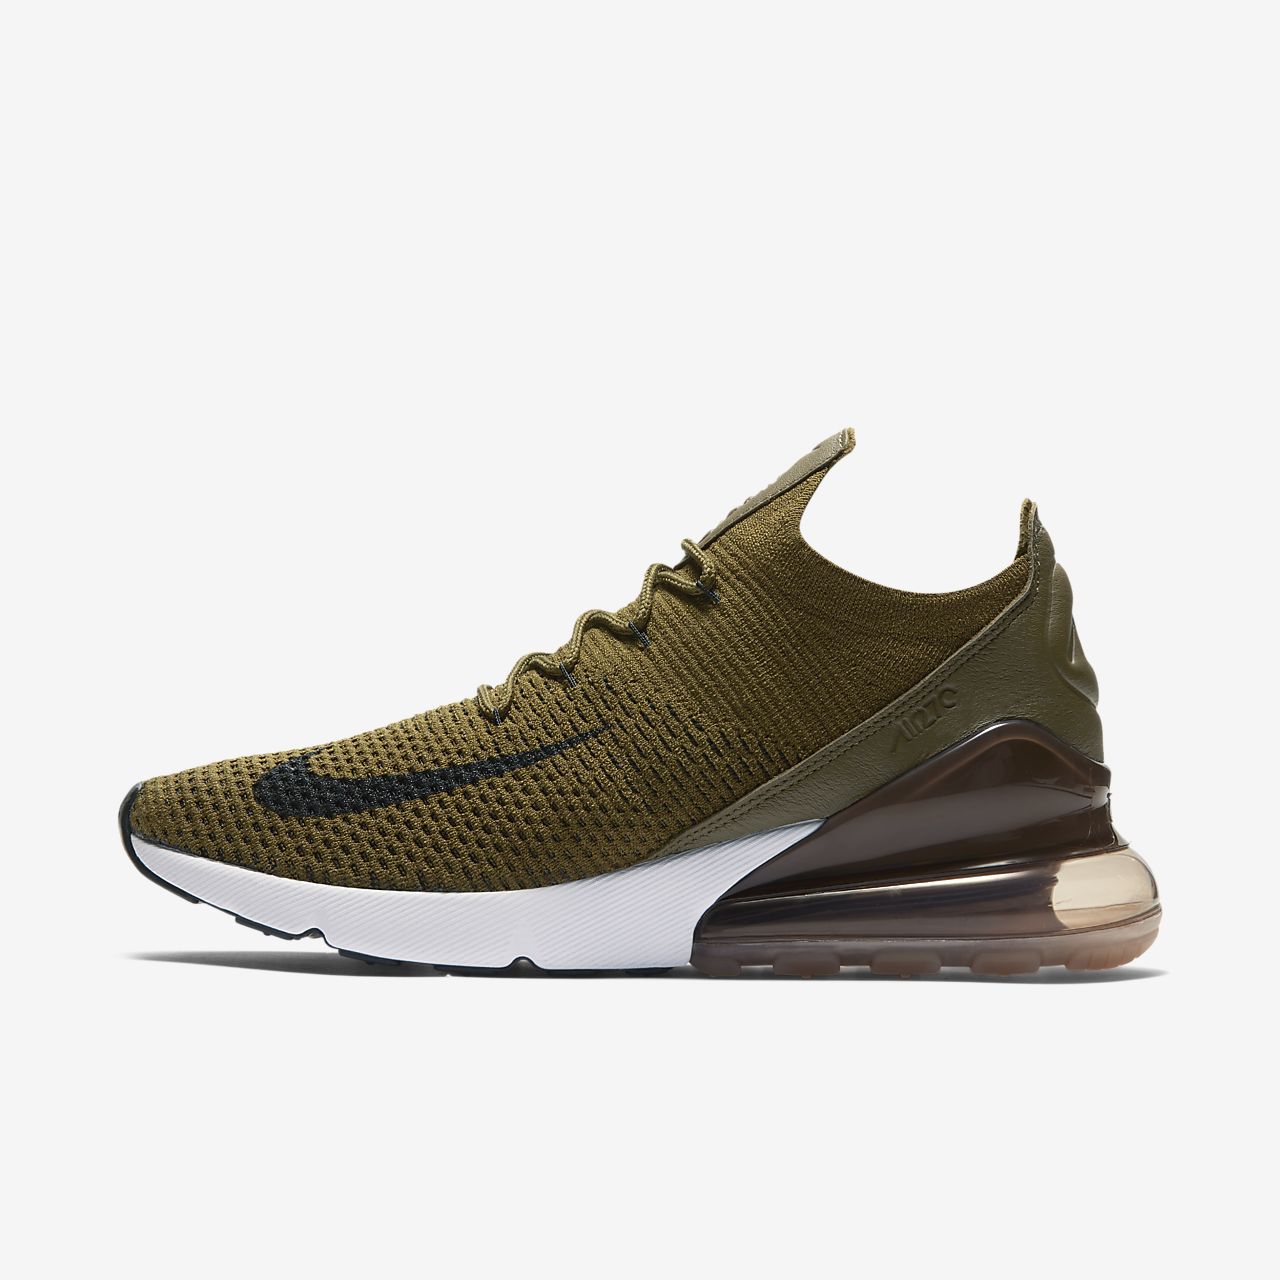 Chaussure Nike Air Max 270 Flyknit pour Homme